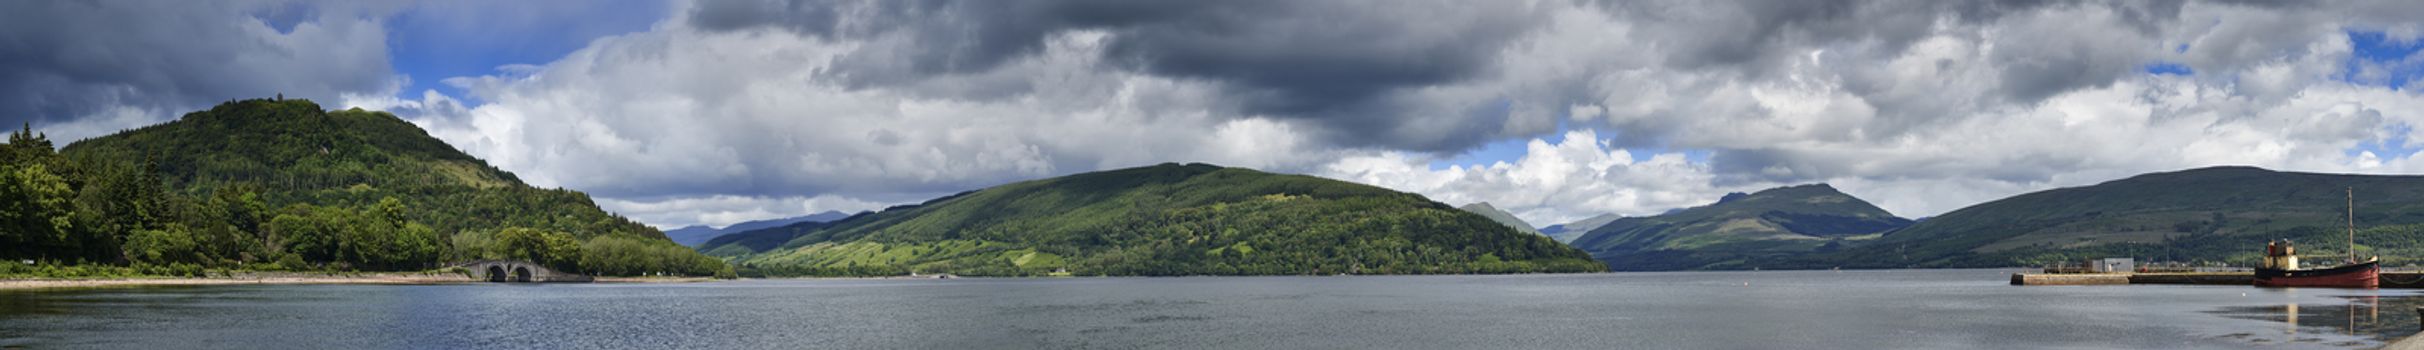 Panoramic view from Inveraray of Loch Fyne with boat moored in harbour and hills in background